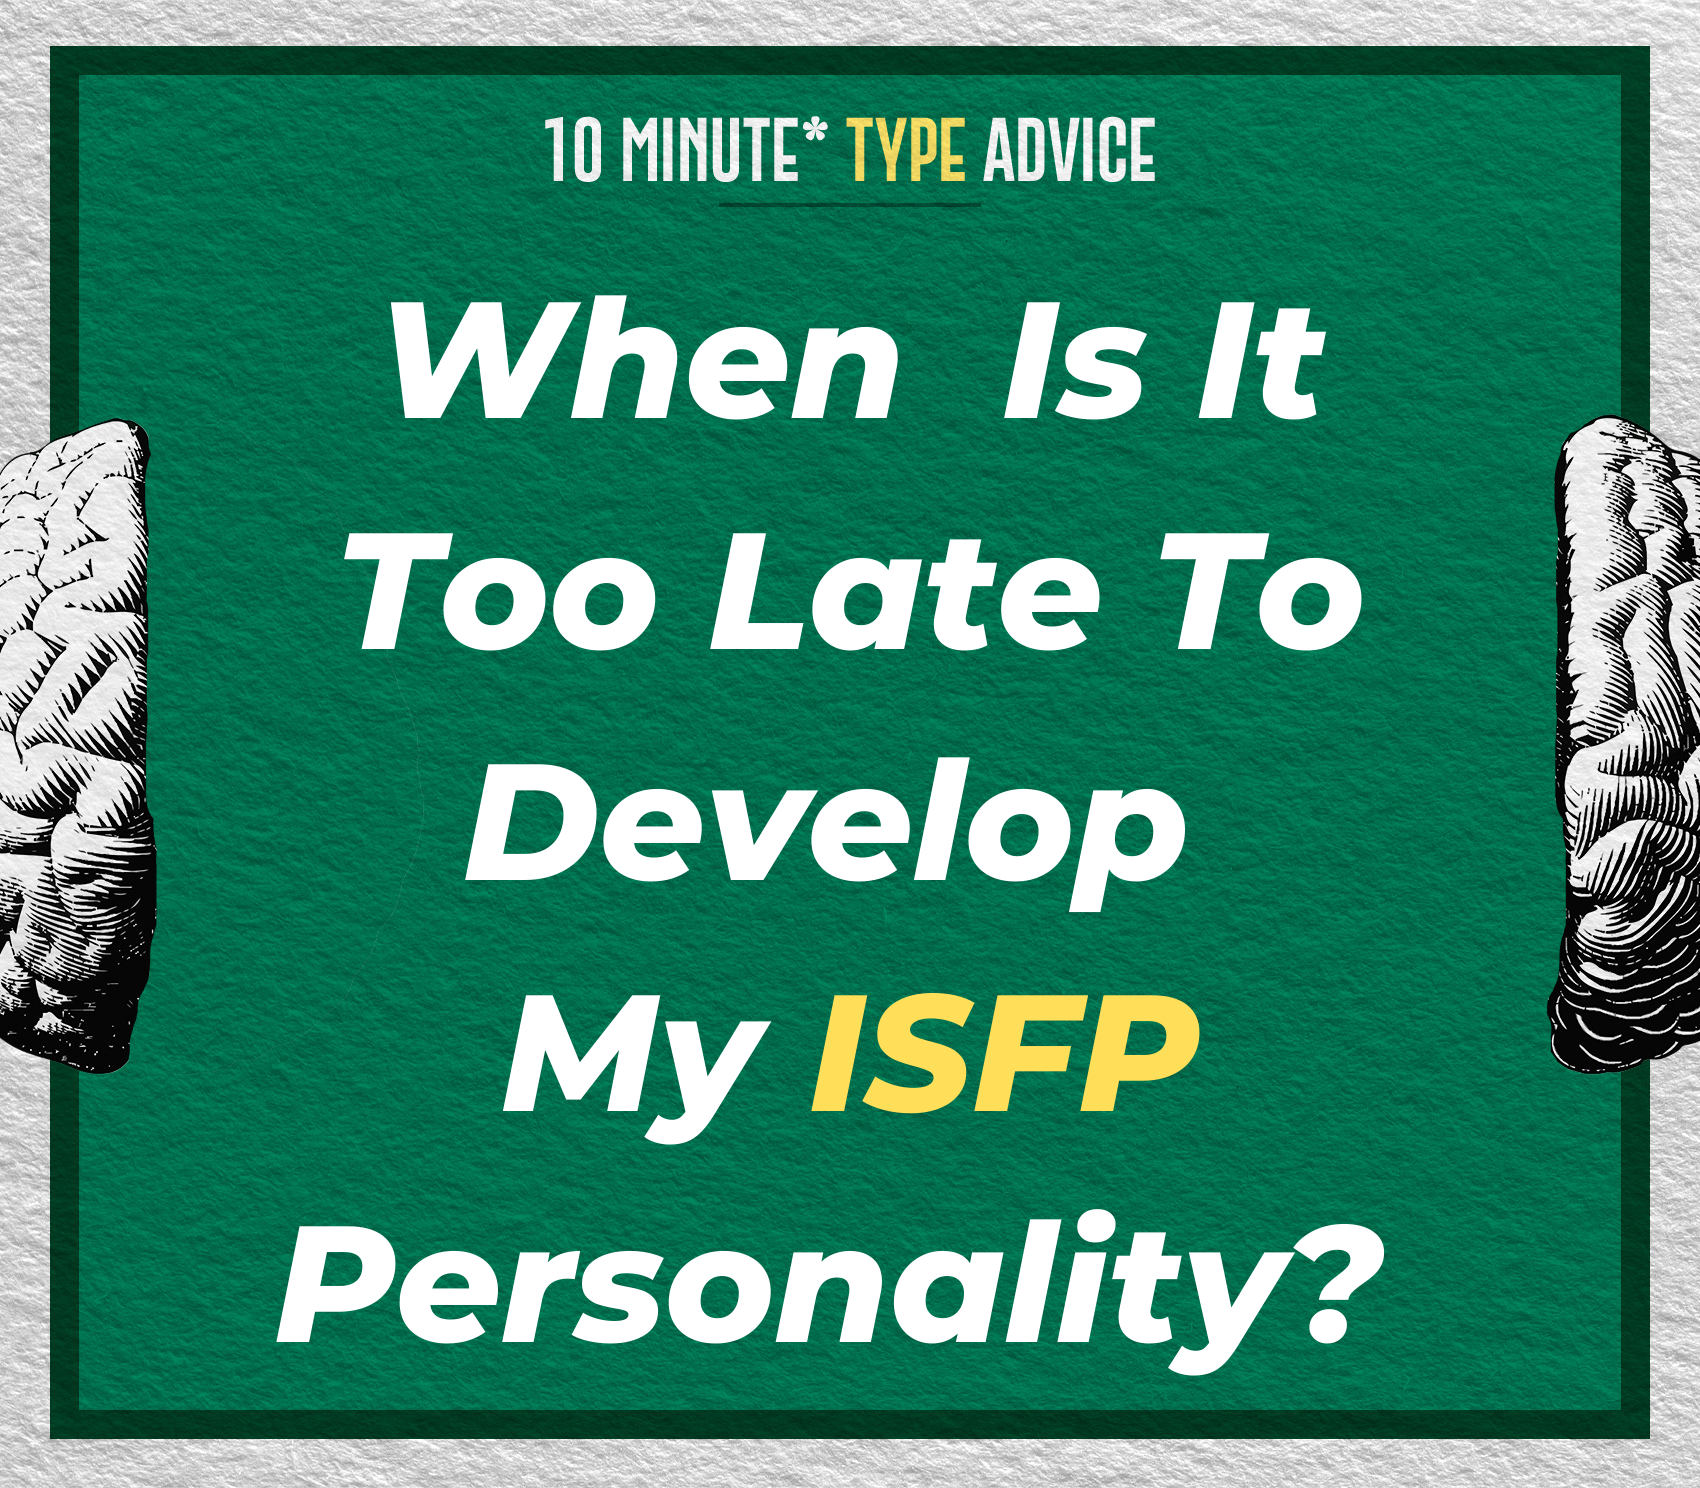 When Is It Too Late To Develop My ISFP Personality? | 10 Min Type Advice | S02:E10